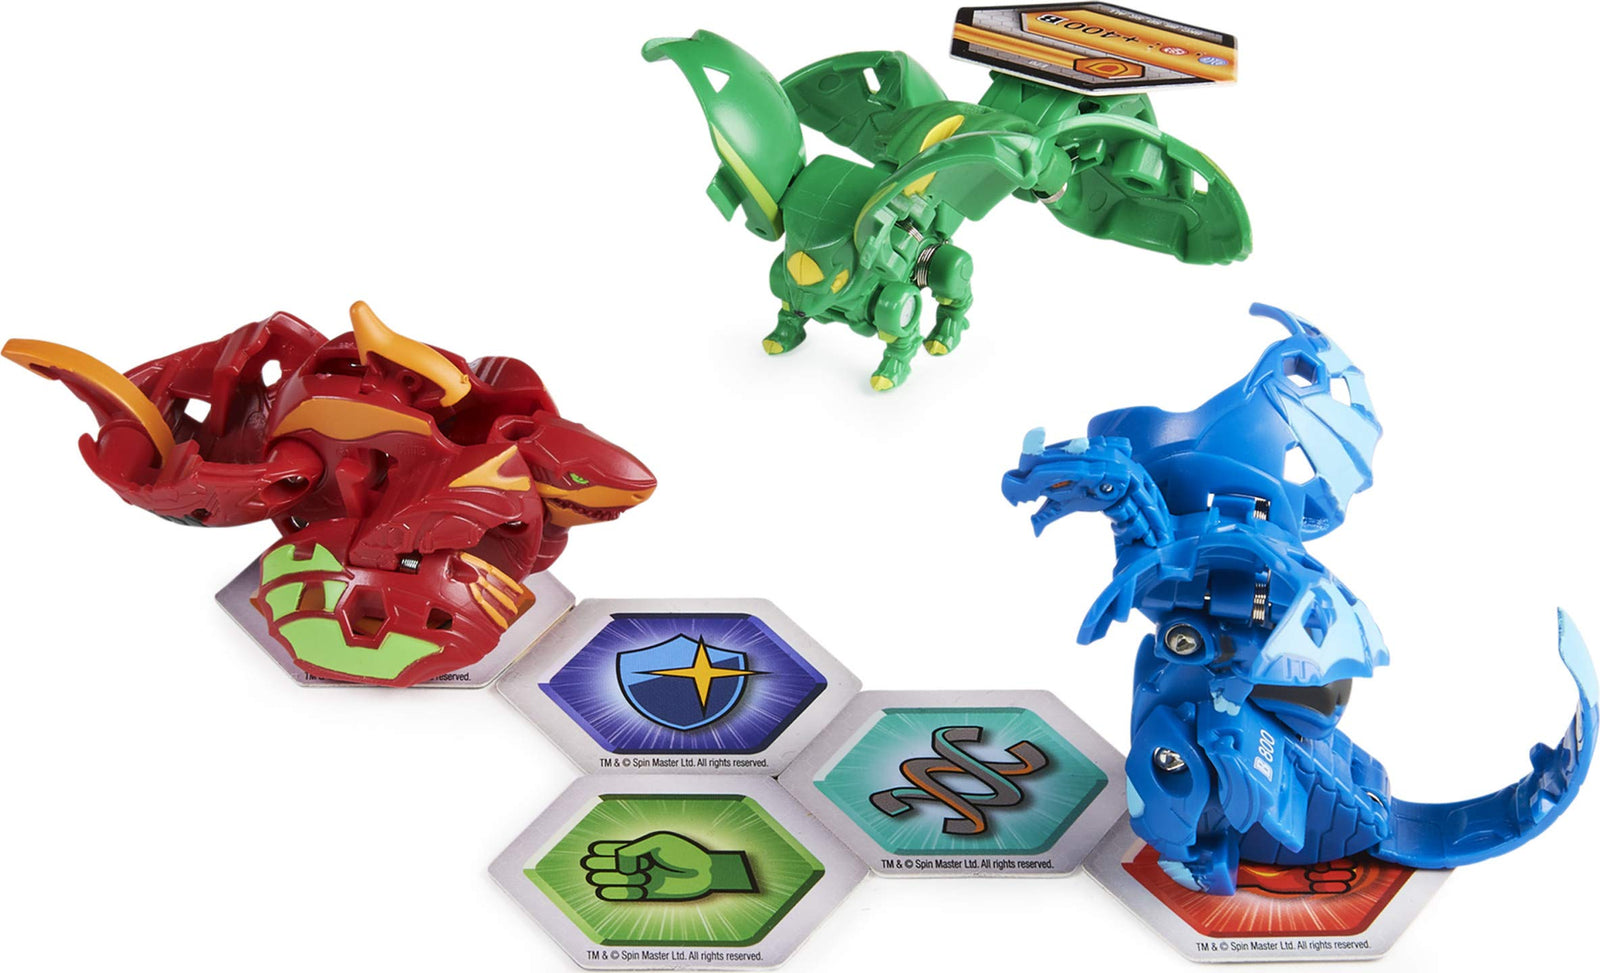 Bakugan Starter Pack 3-Pack, Fenneca Ultra, Geogan Rising Collectible Action Figures, Kids Toys for Boys